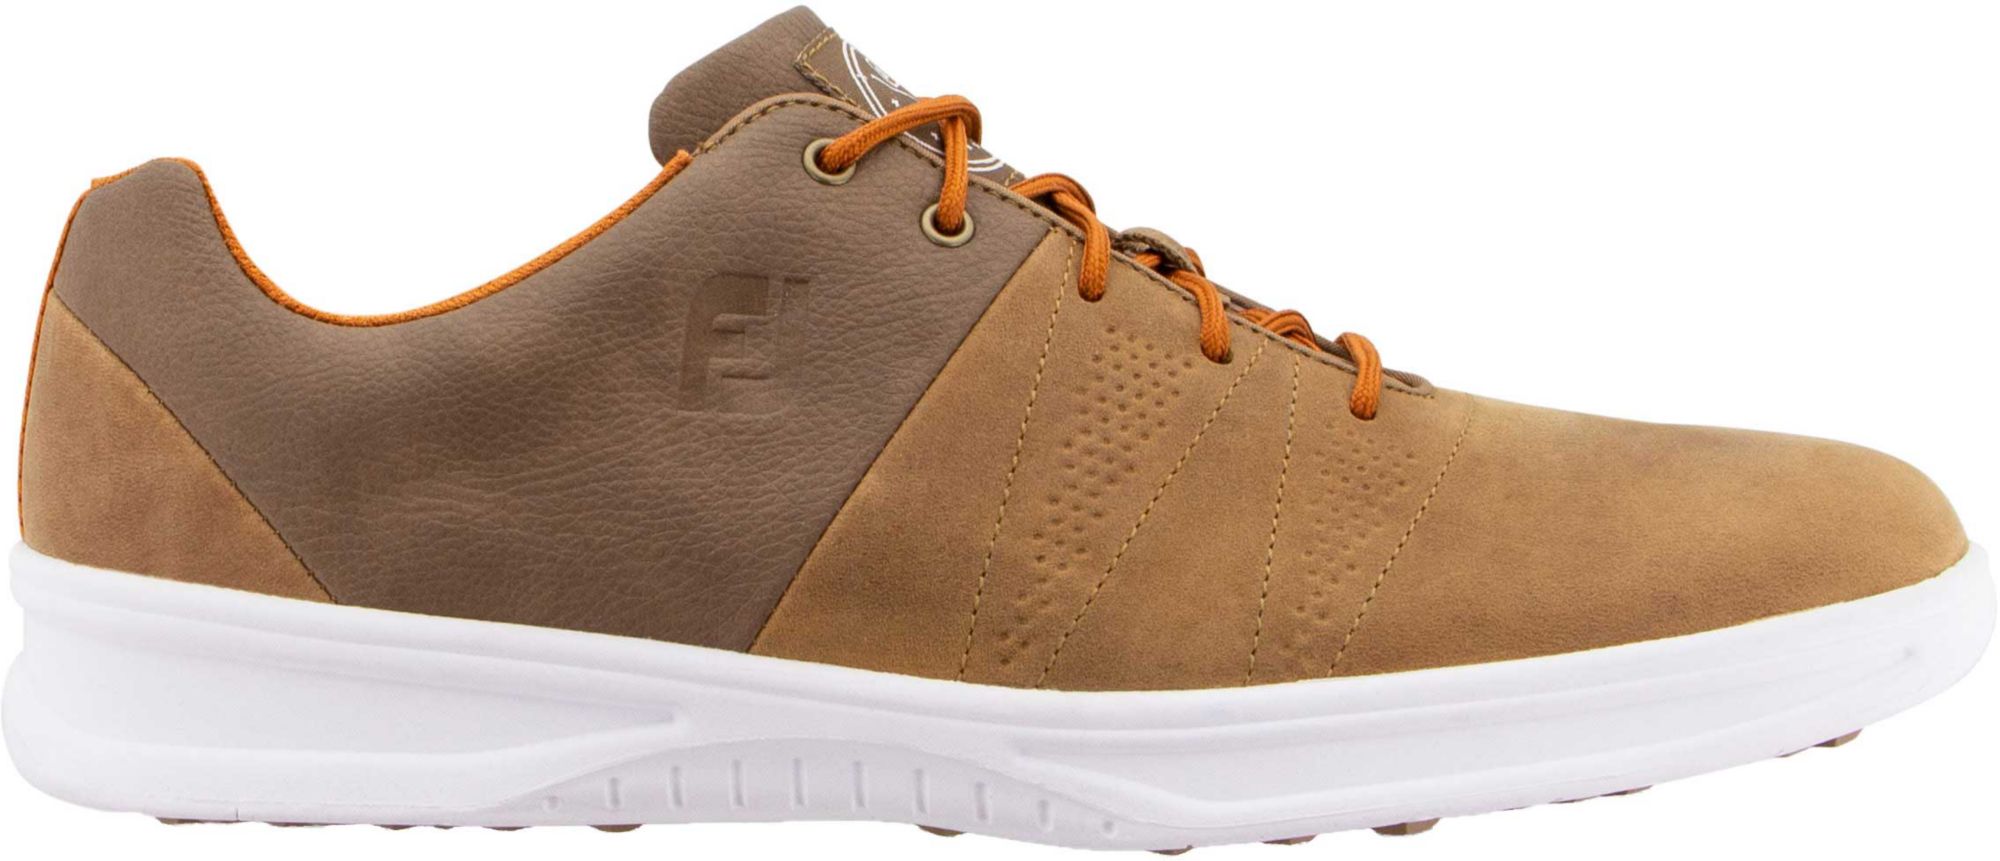 footjoy casual golf shoes